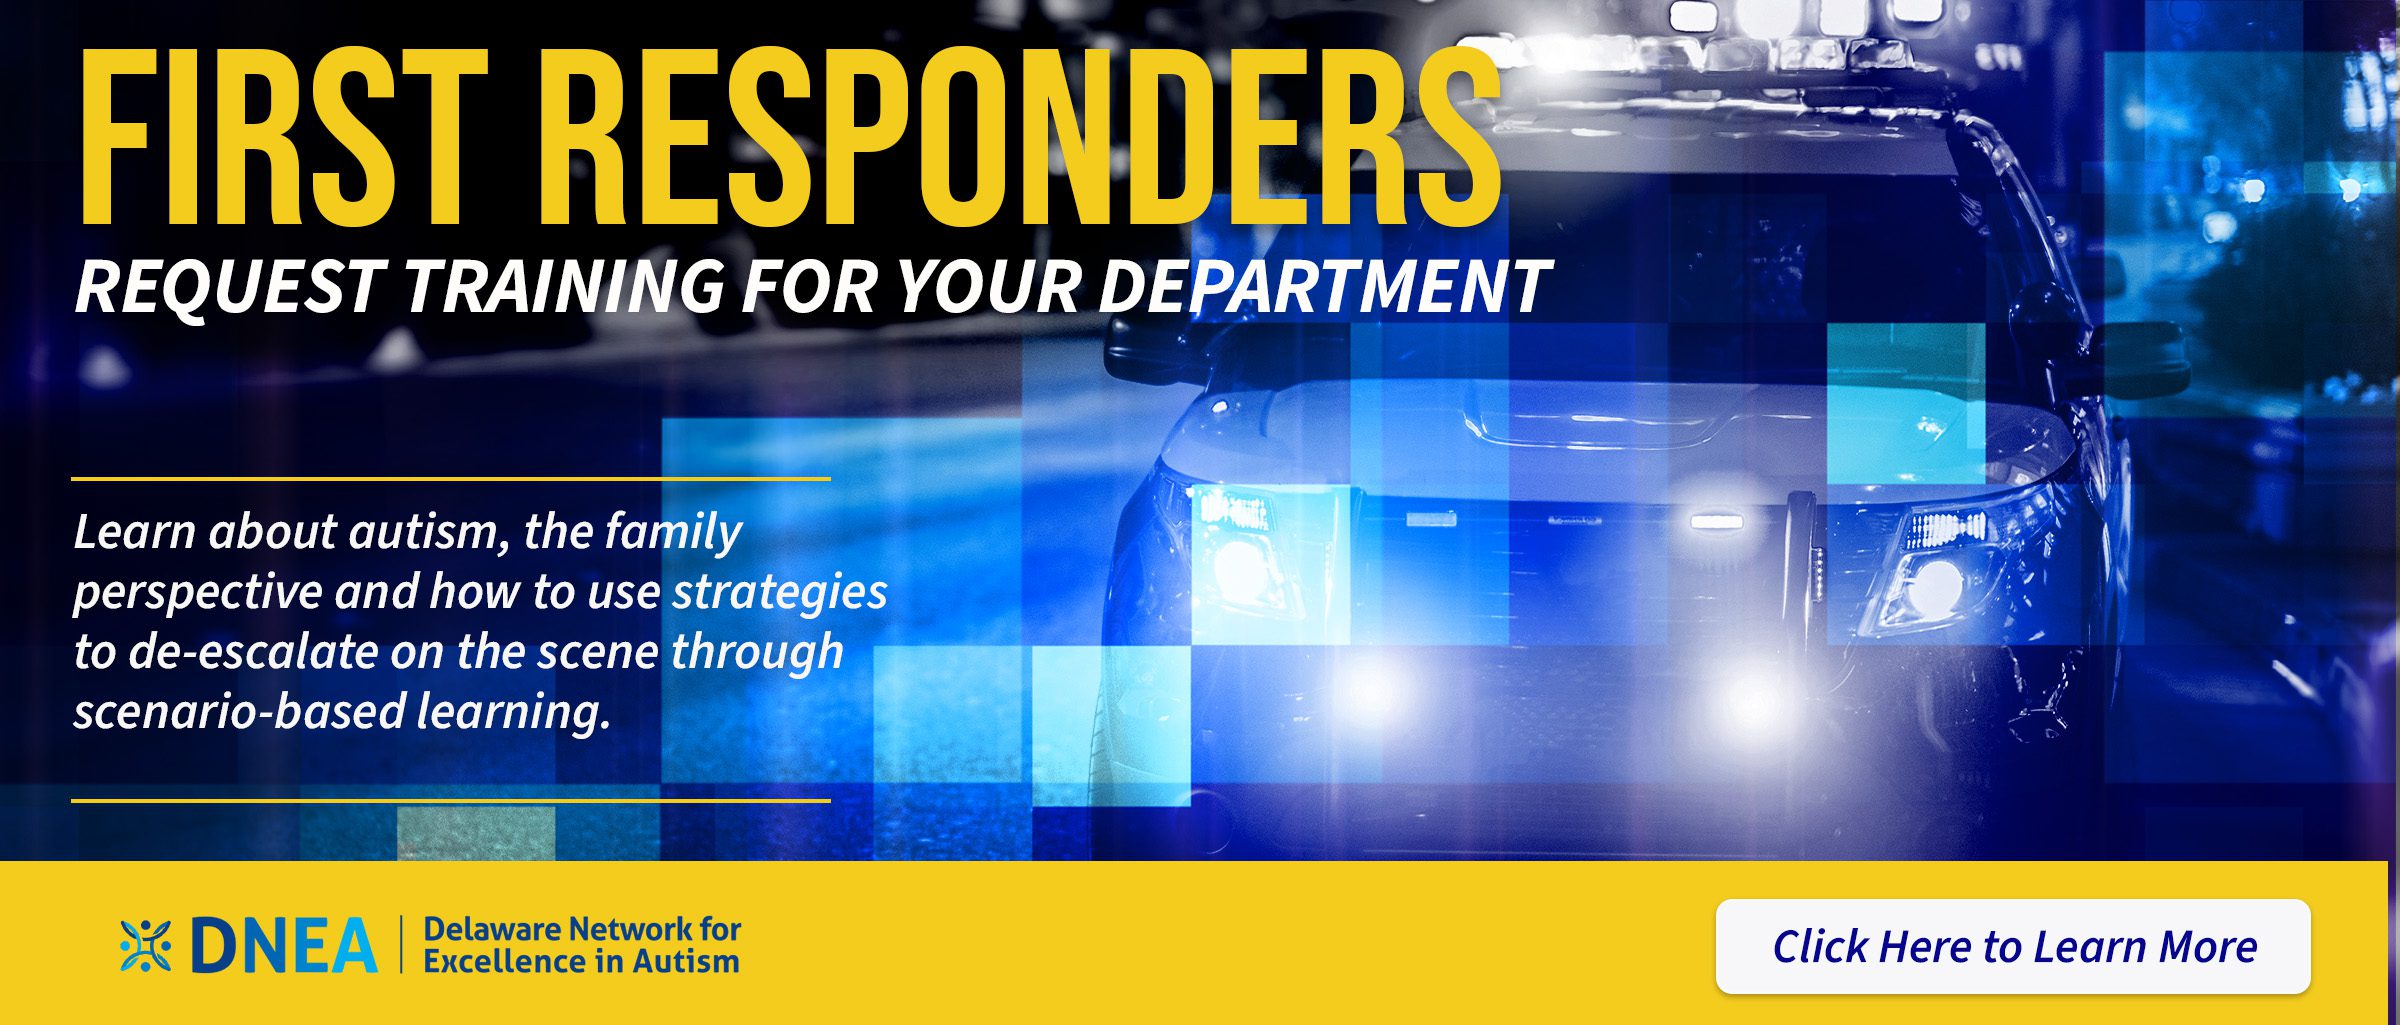 First Responders, click here to request training for your department. Learn about autism, the family perspective and hor to use strategies to de-escalate on the scene through scenario-based learning.